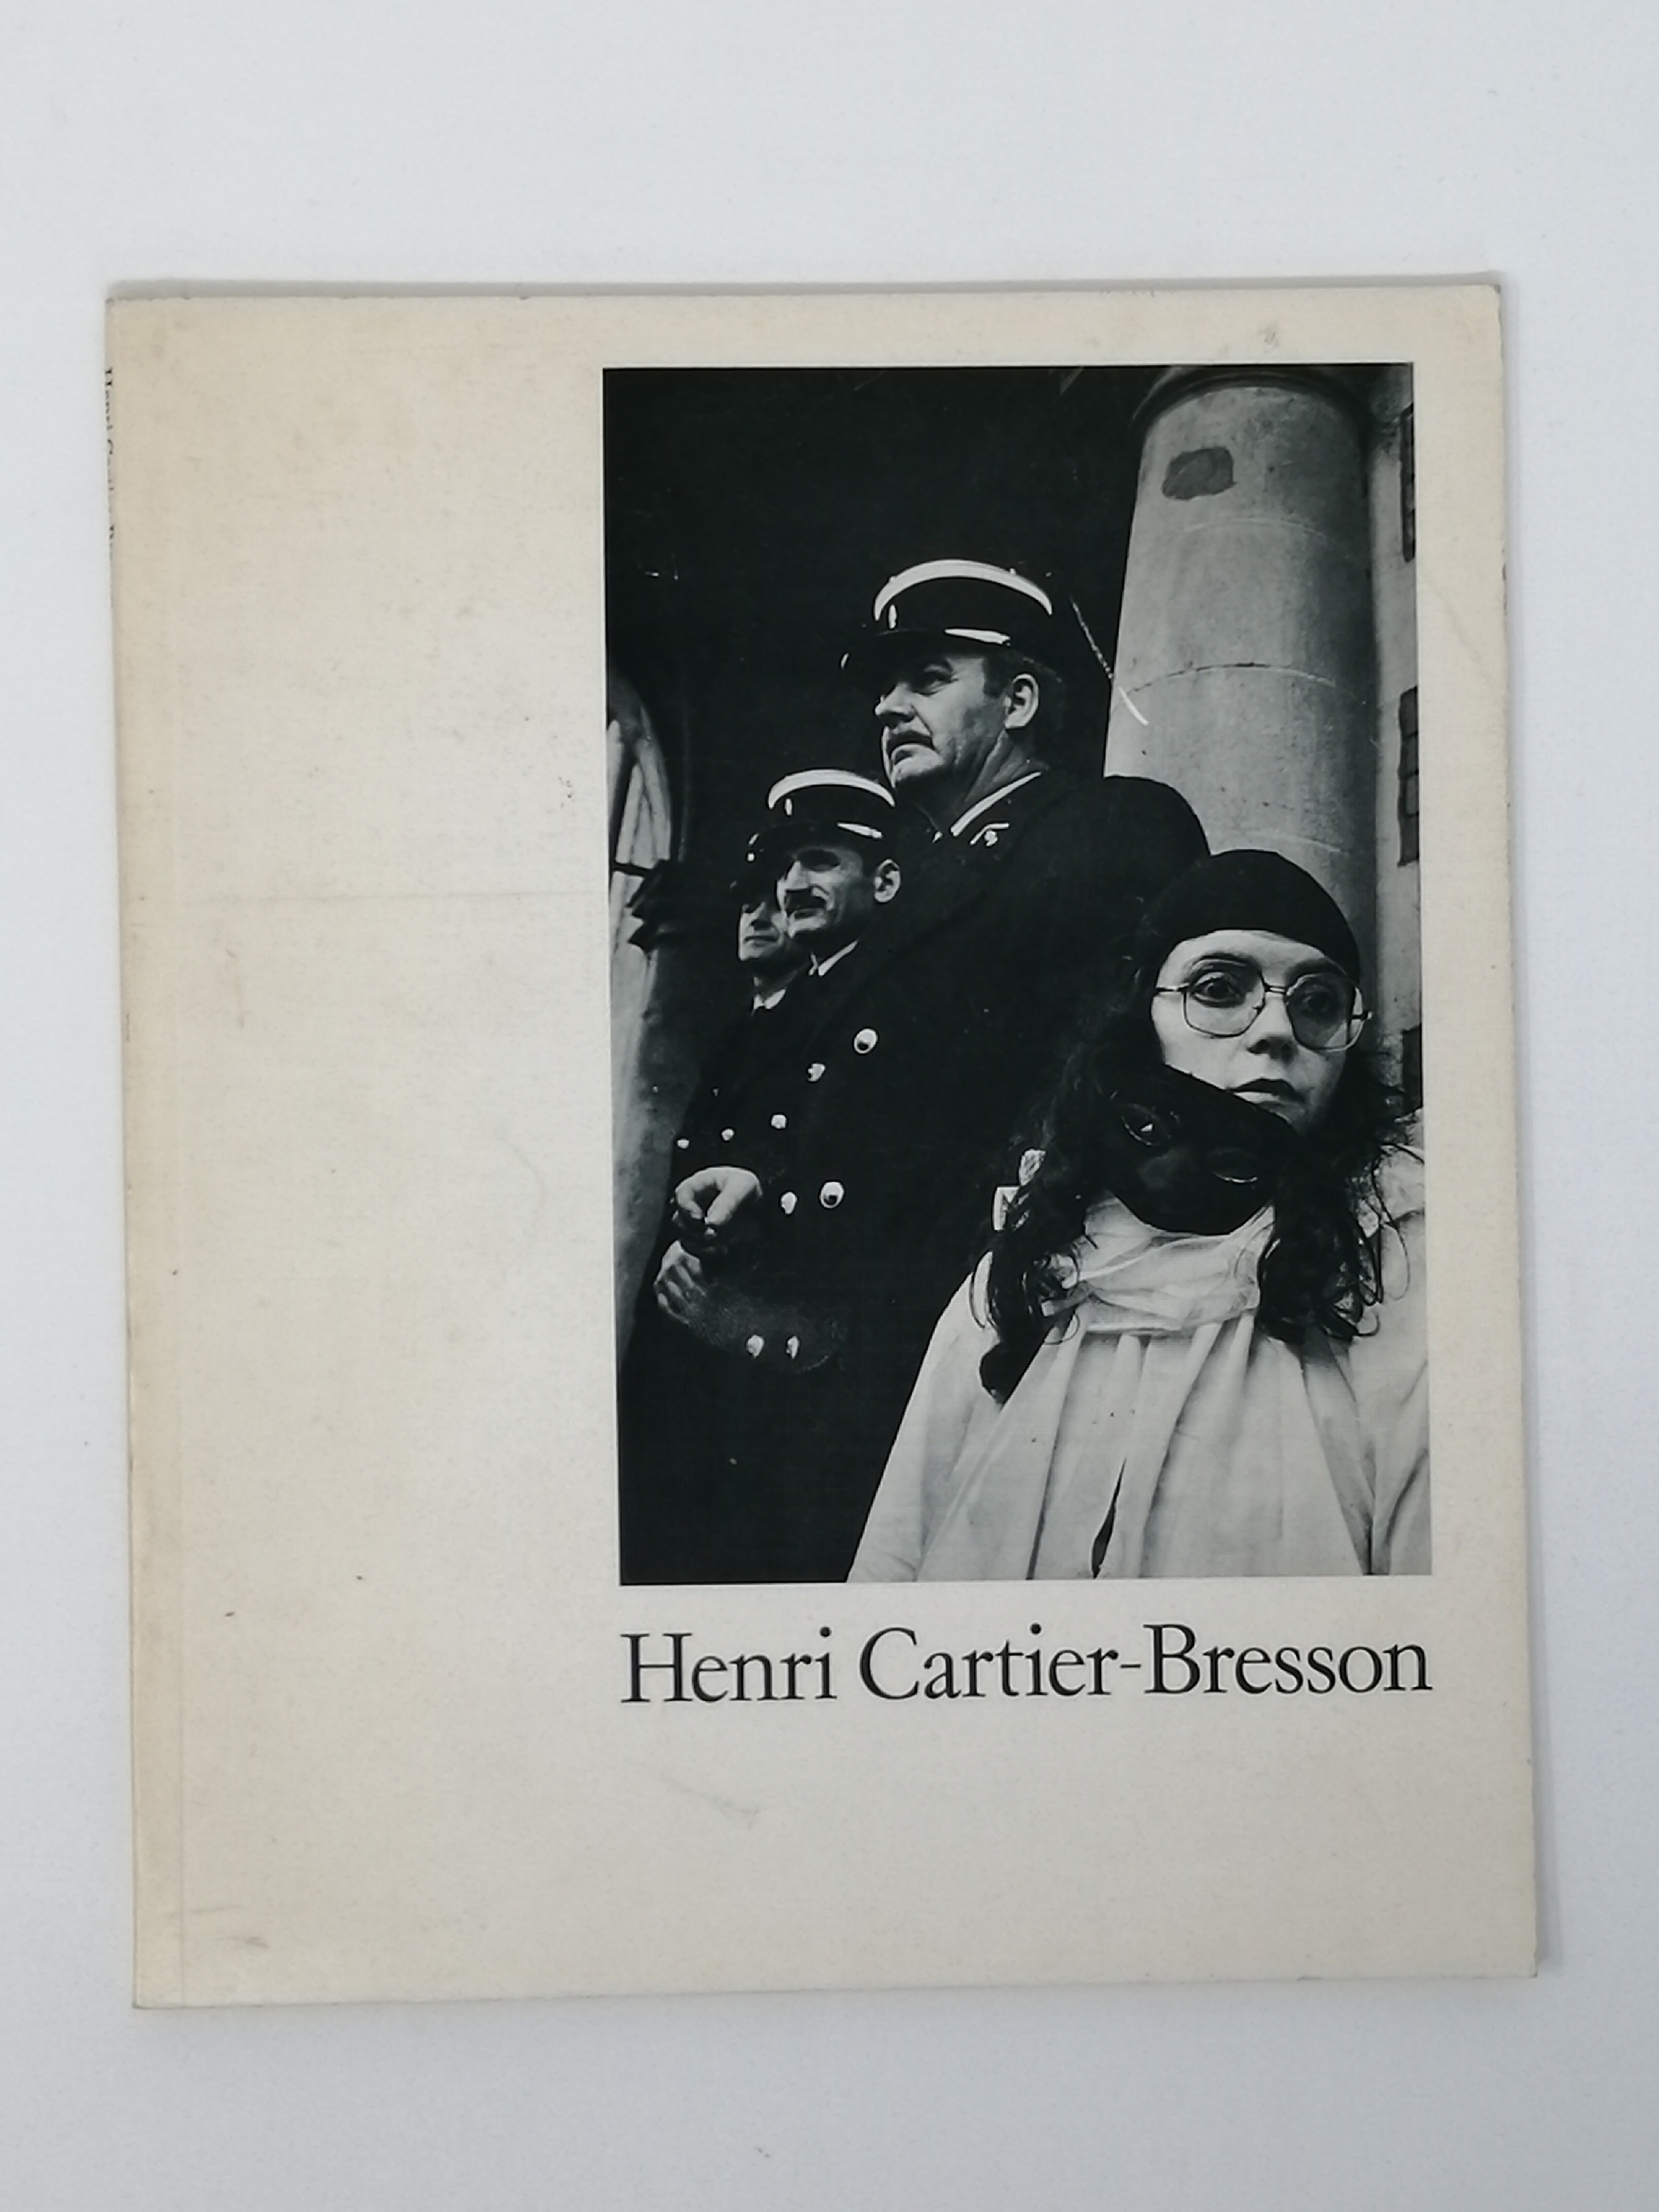 Henri Cartier-Bresson: His archive of 390 photographs from the Victoria and Albert Museum. - Ernst Gombrich. Henri Cartier-Bresson.